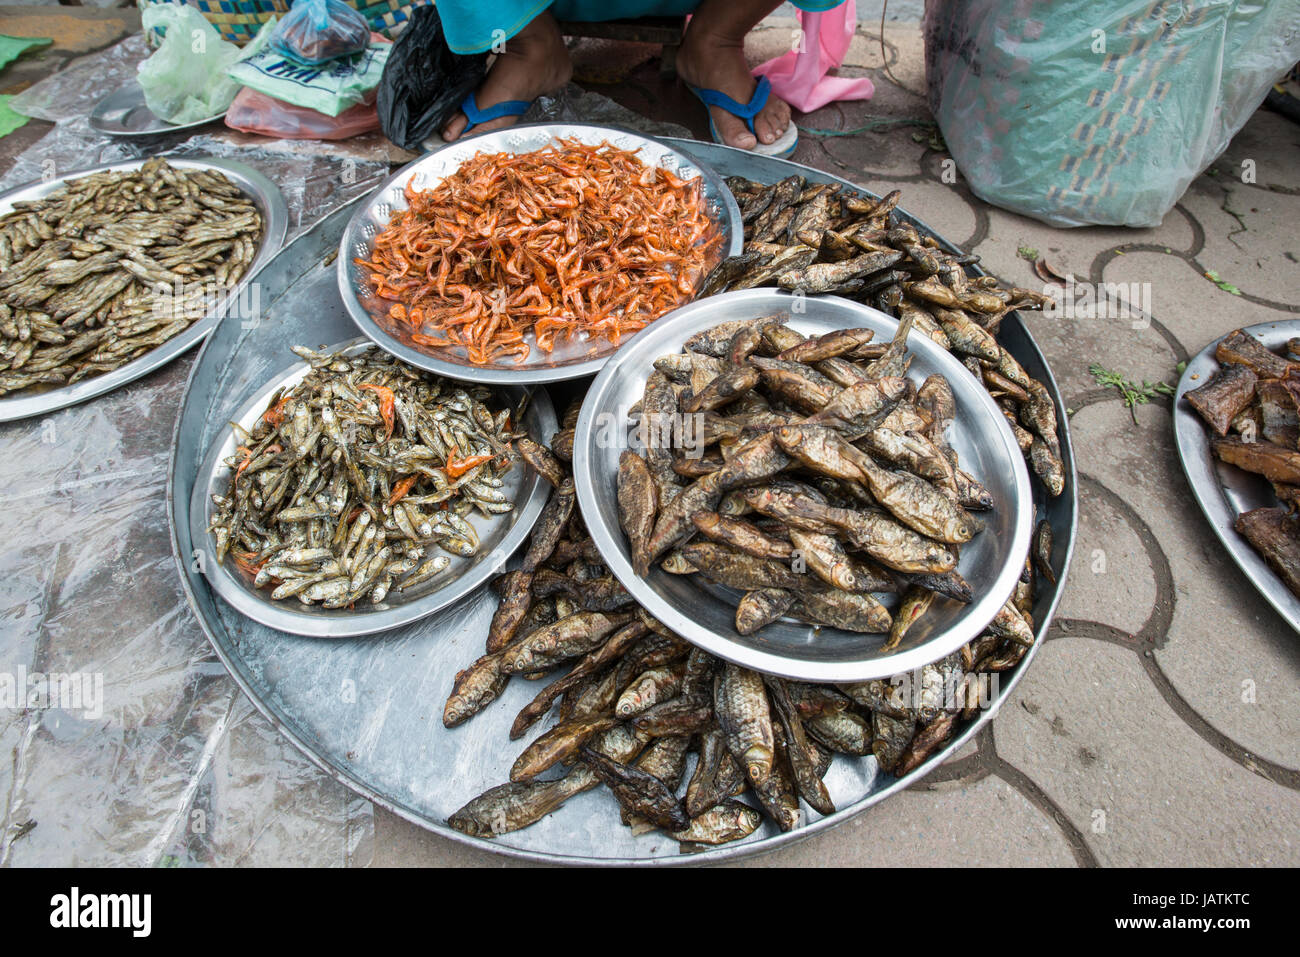 Dried fish are on display at a market stall in Imphal, Manipur, India Stock Photo